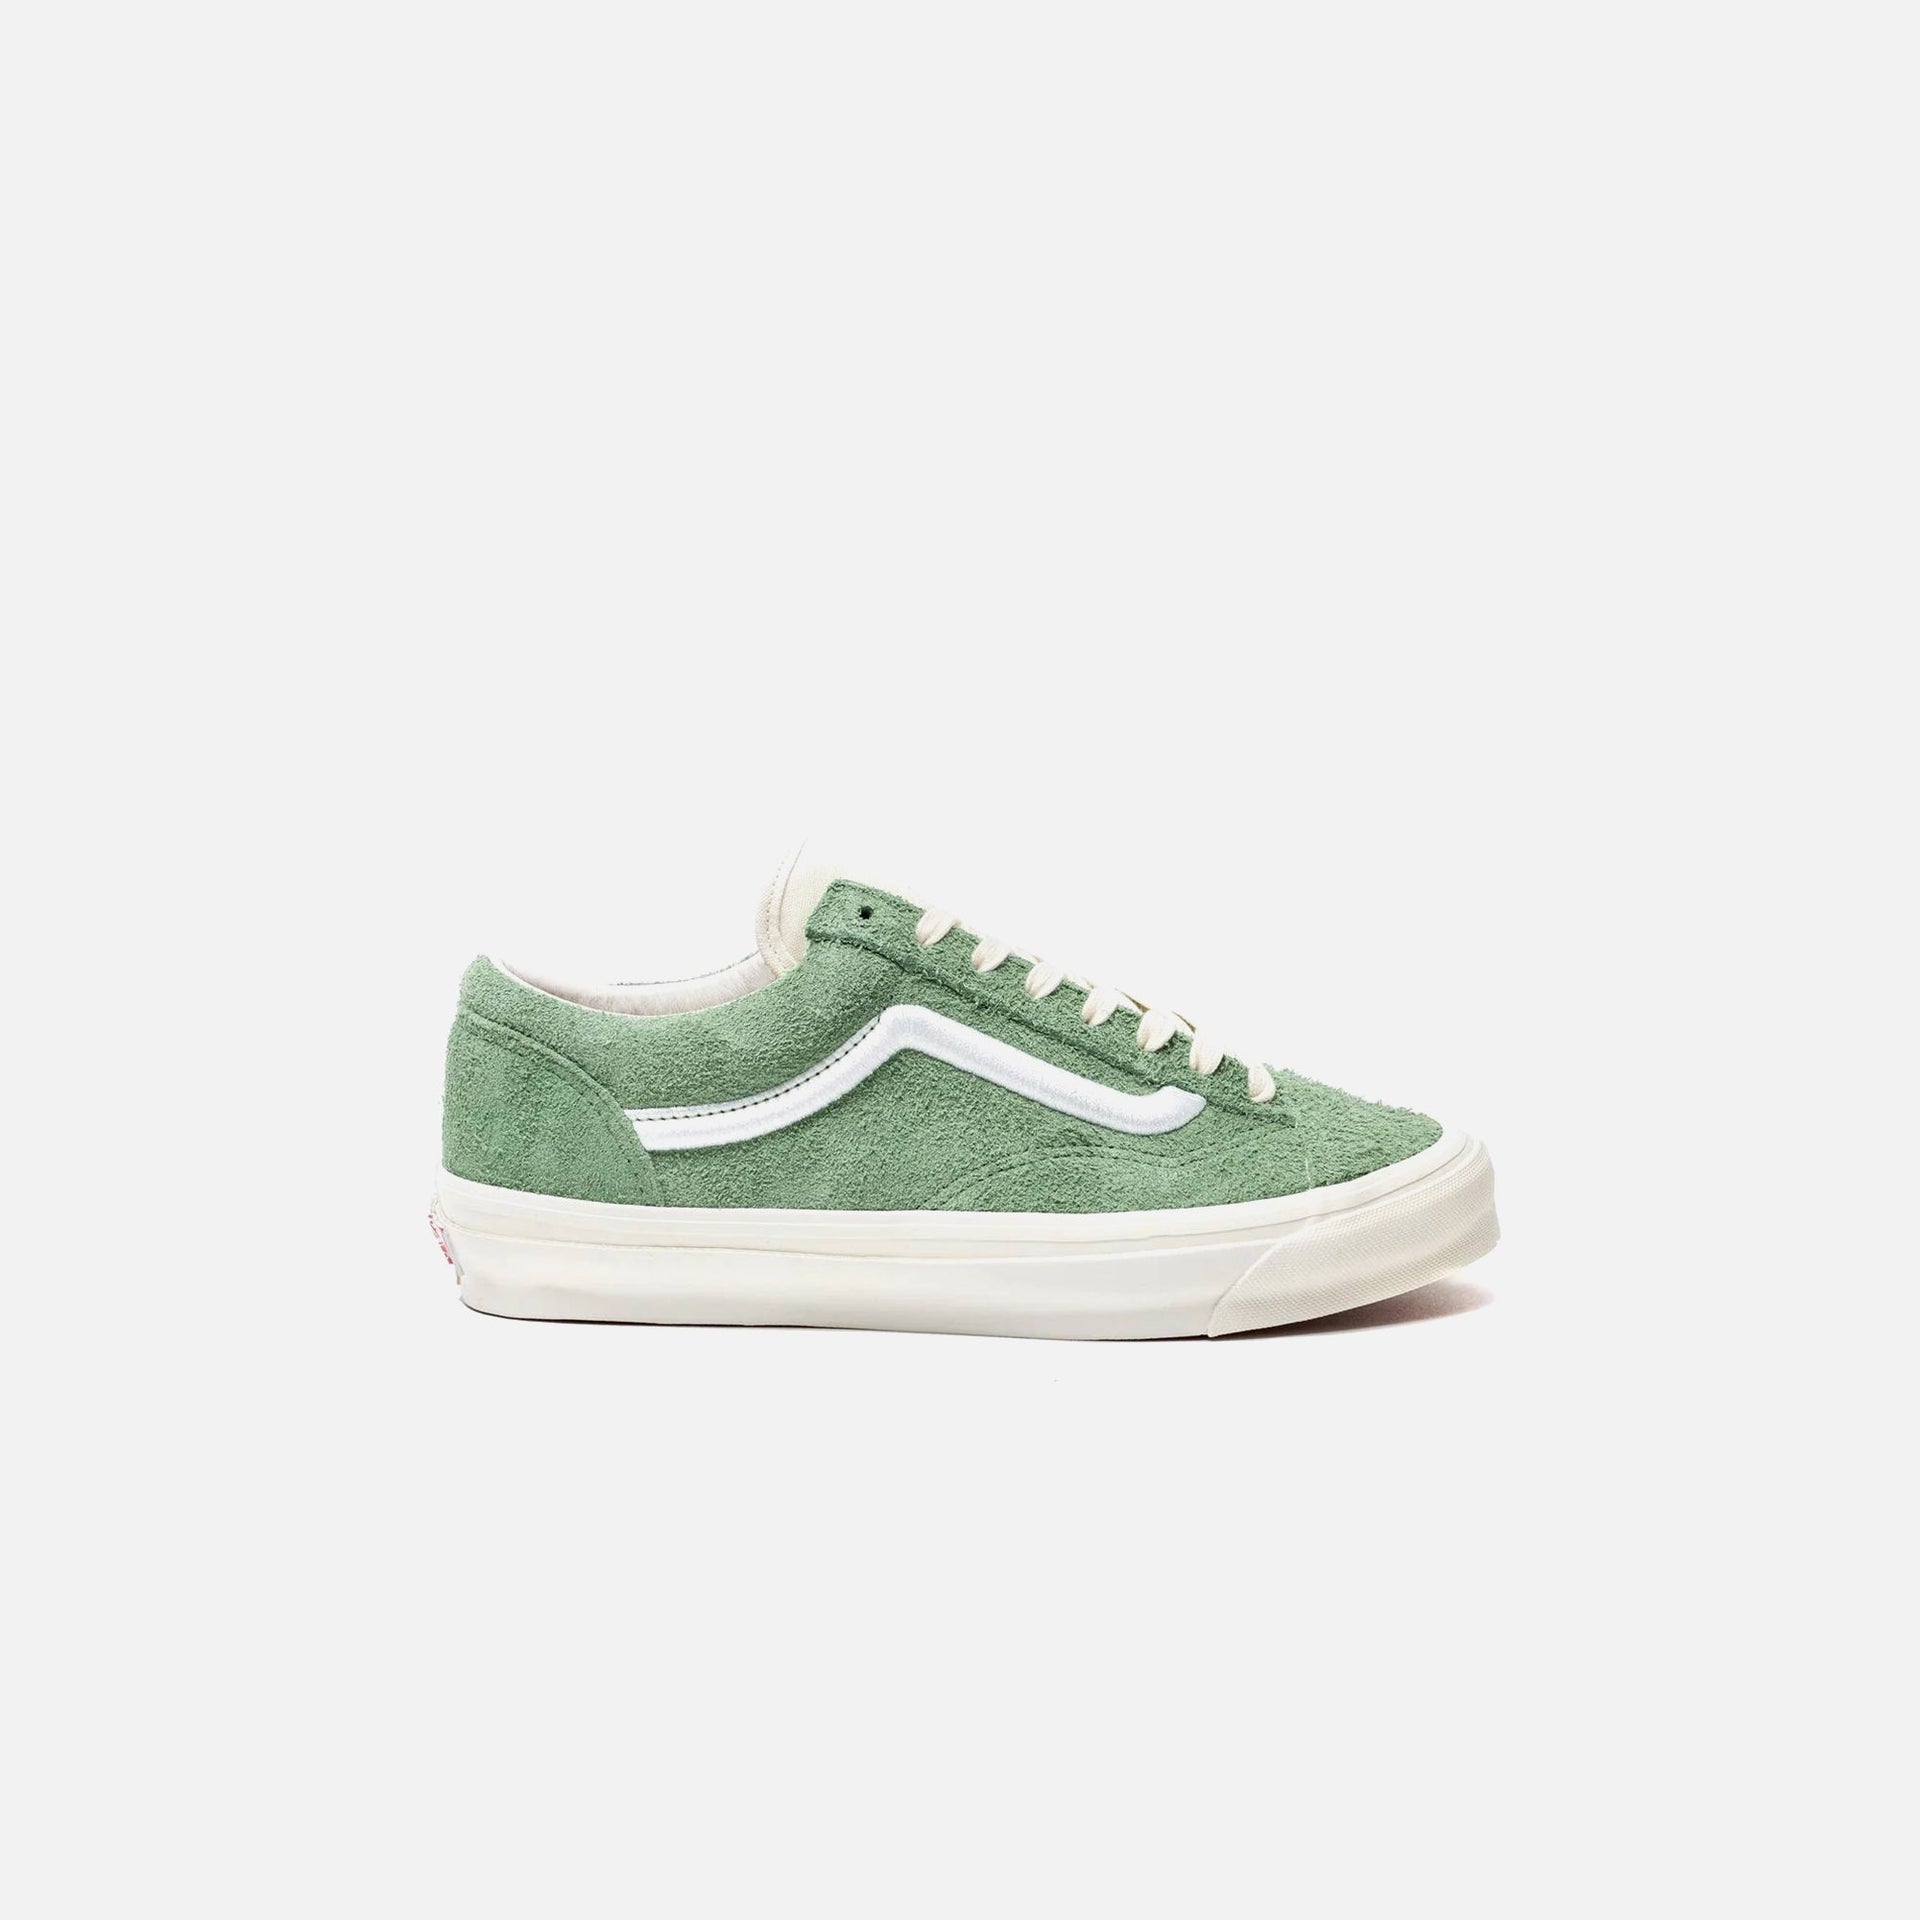 Vans OG Style 36 LX Cooperstown - Loden Frost